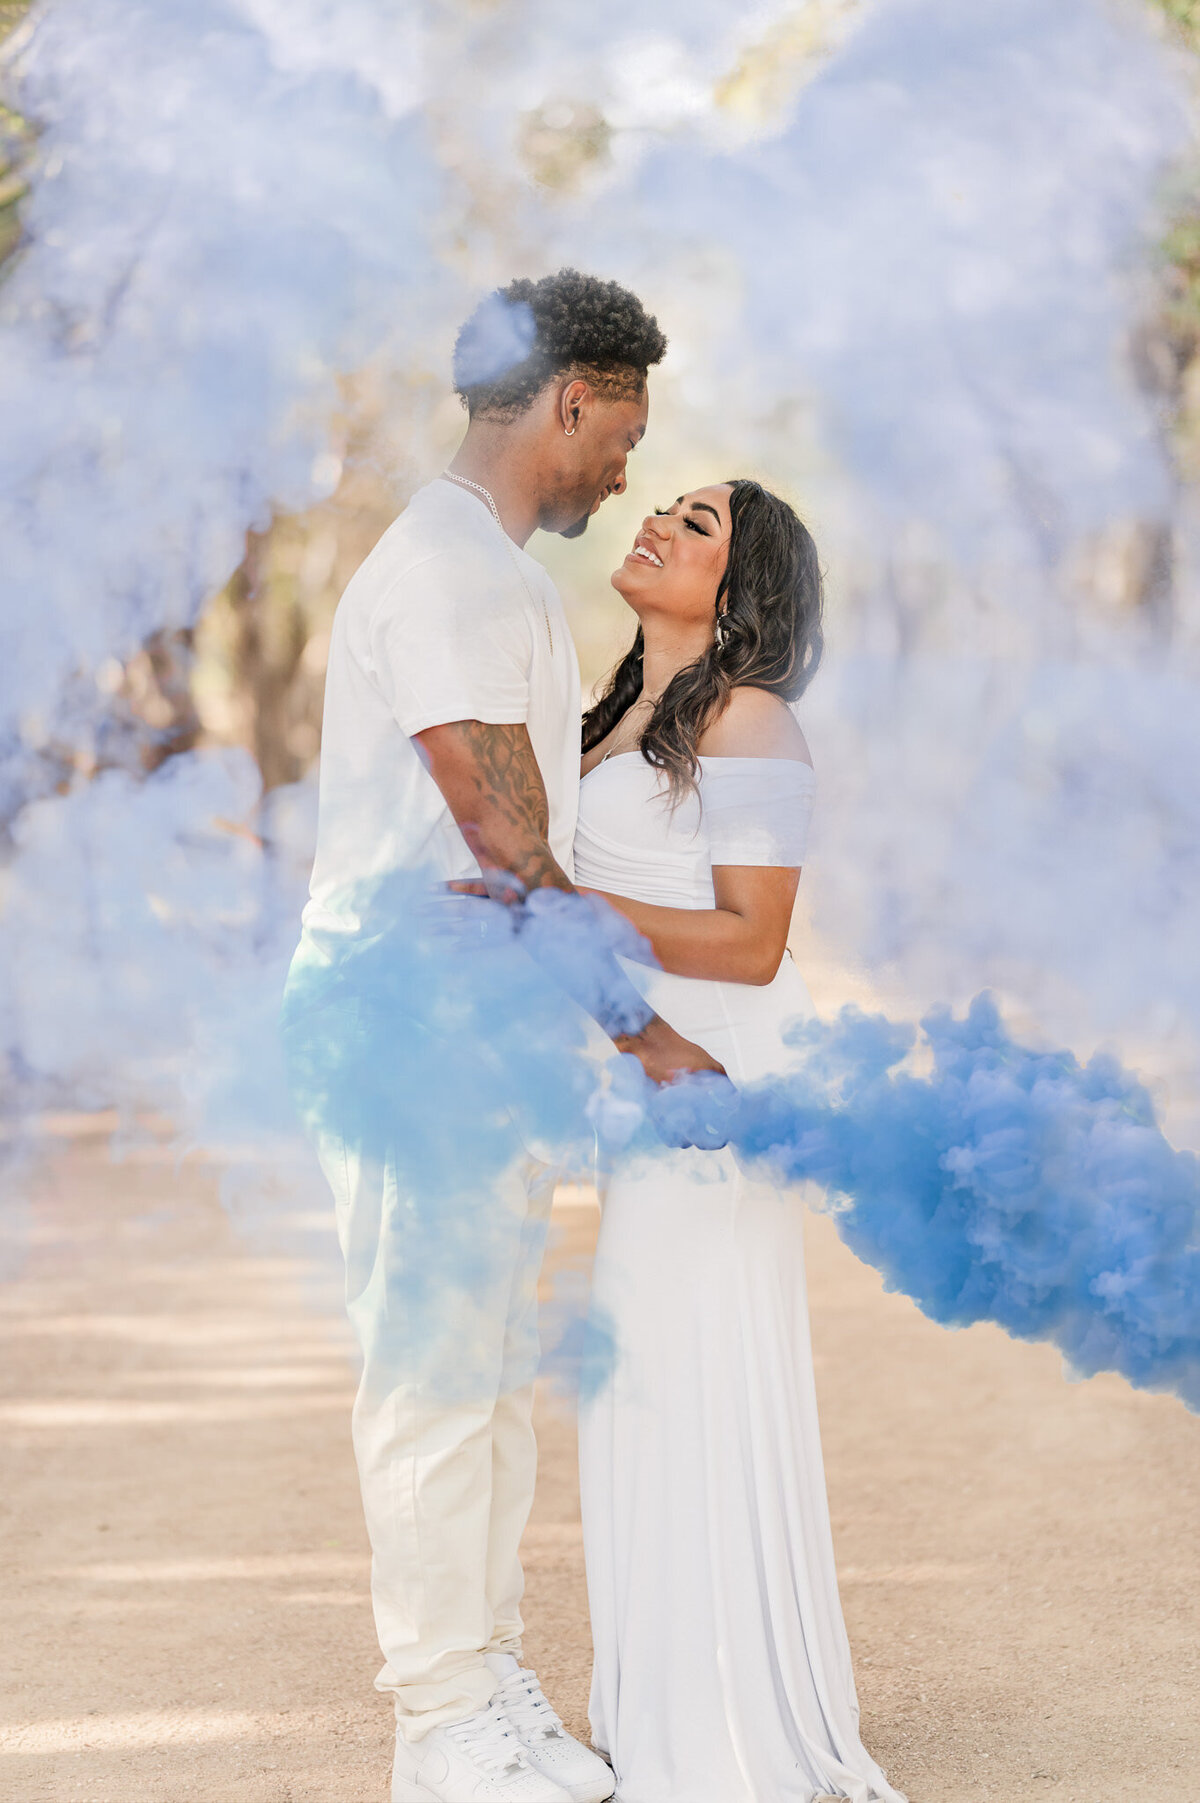 Couple embraces and smiles amidst blue gender reveal smoke from maternity pictures in San Antonio.